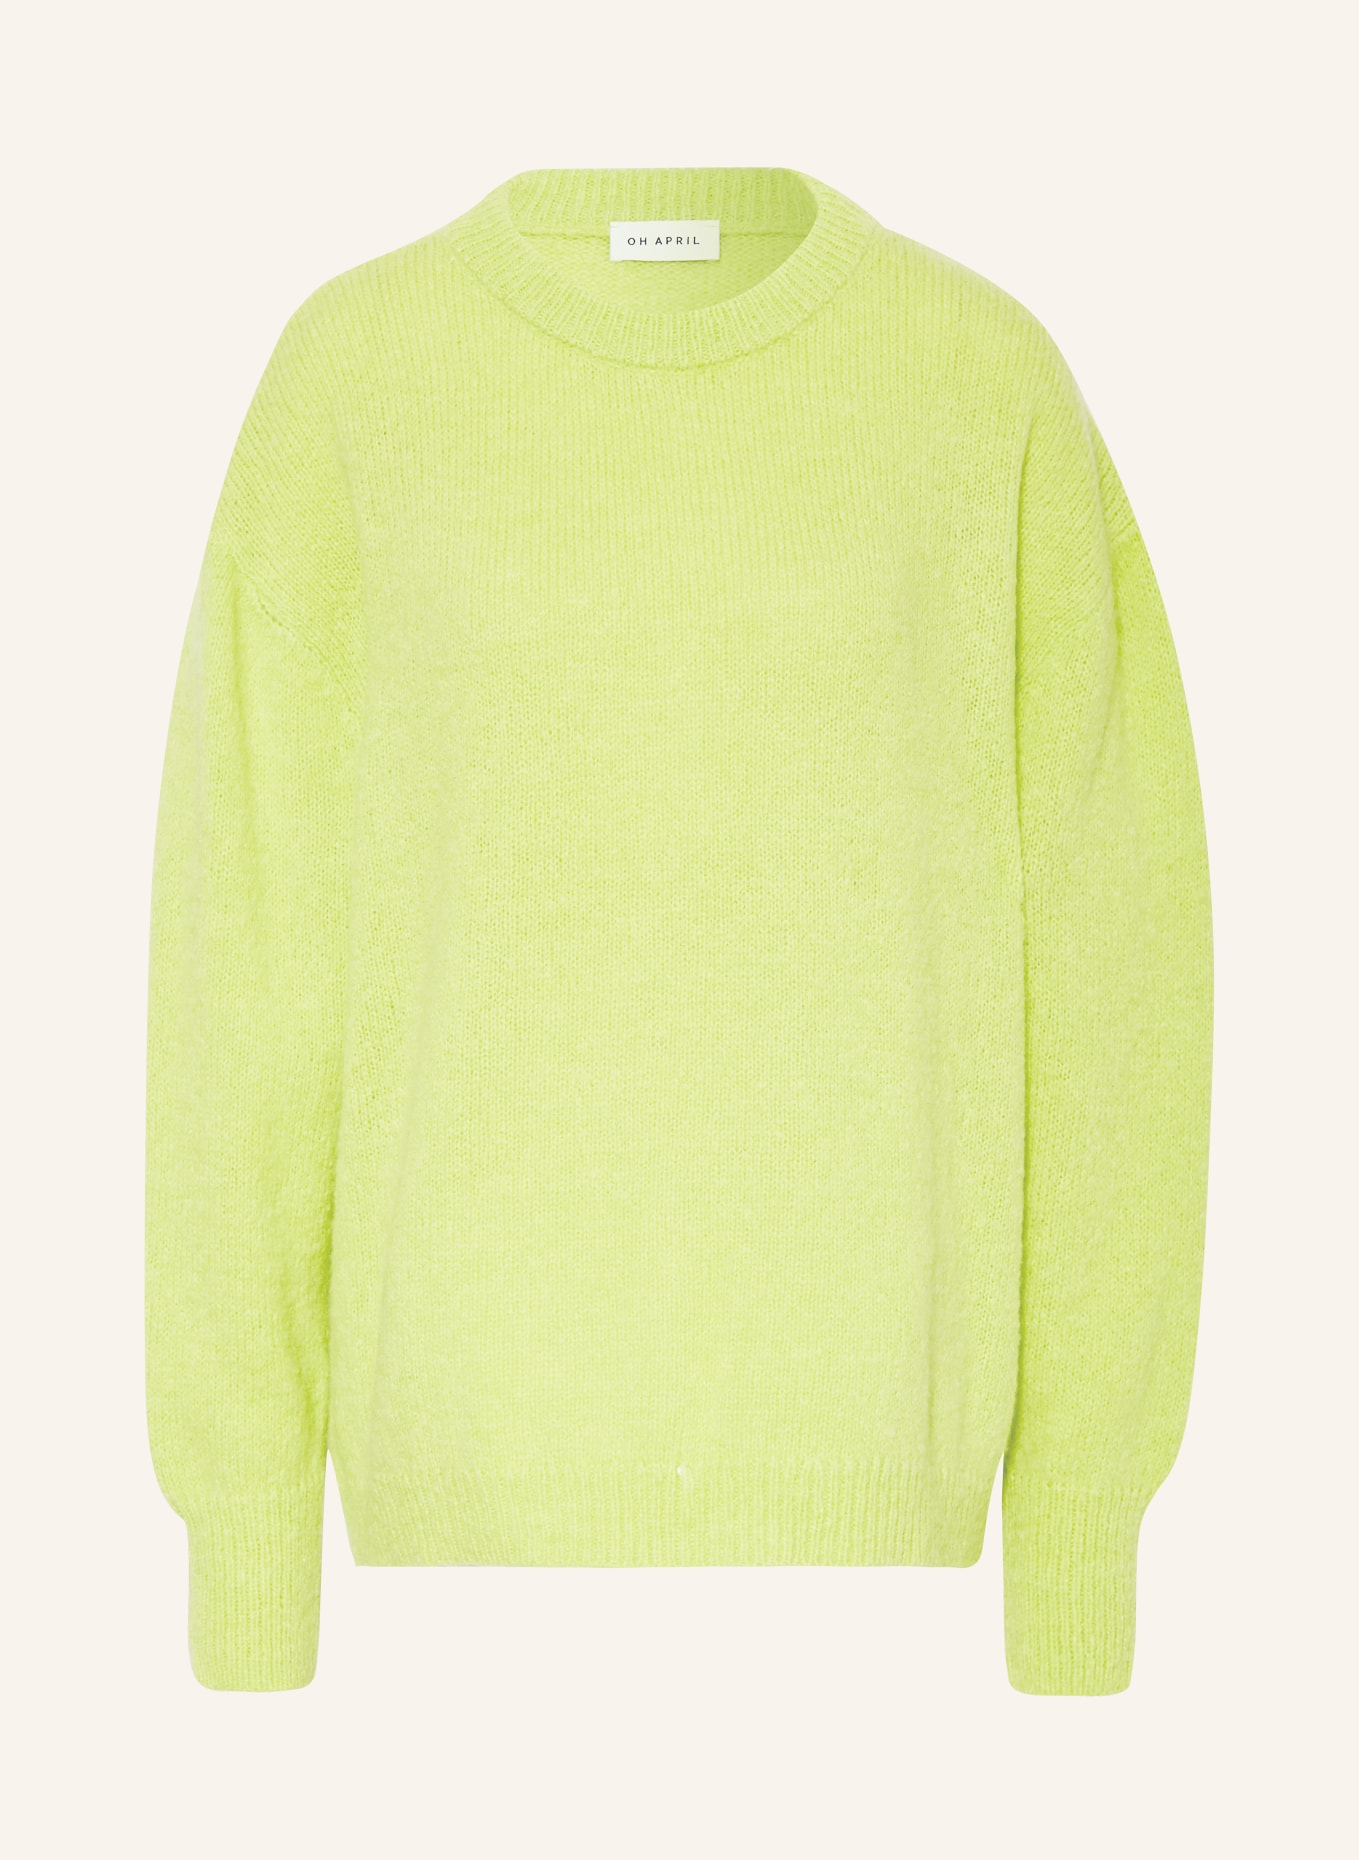 OH APRIL Oversized sweater OLA with alpaca, Color: LIME LIME (Image 1)